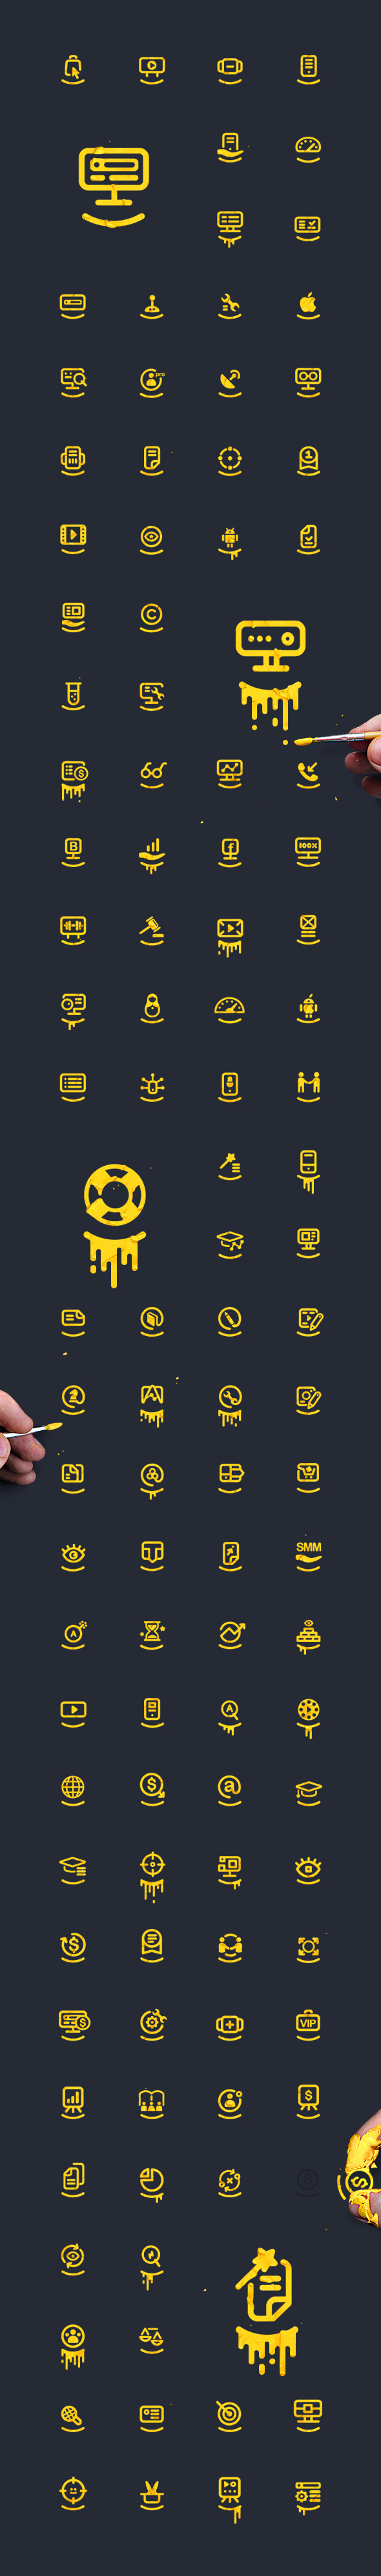 creation paper Web site design gold flat yellow paint Icon icons sketch creative smiley smile